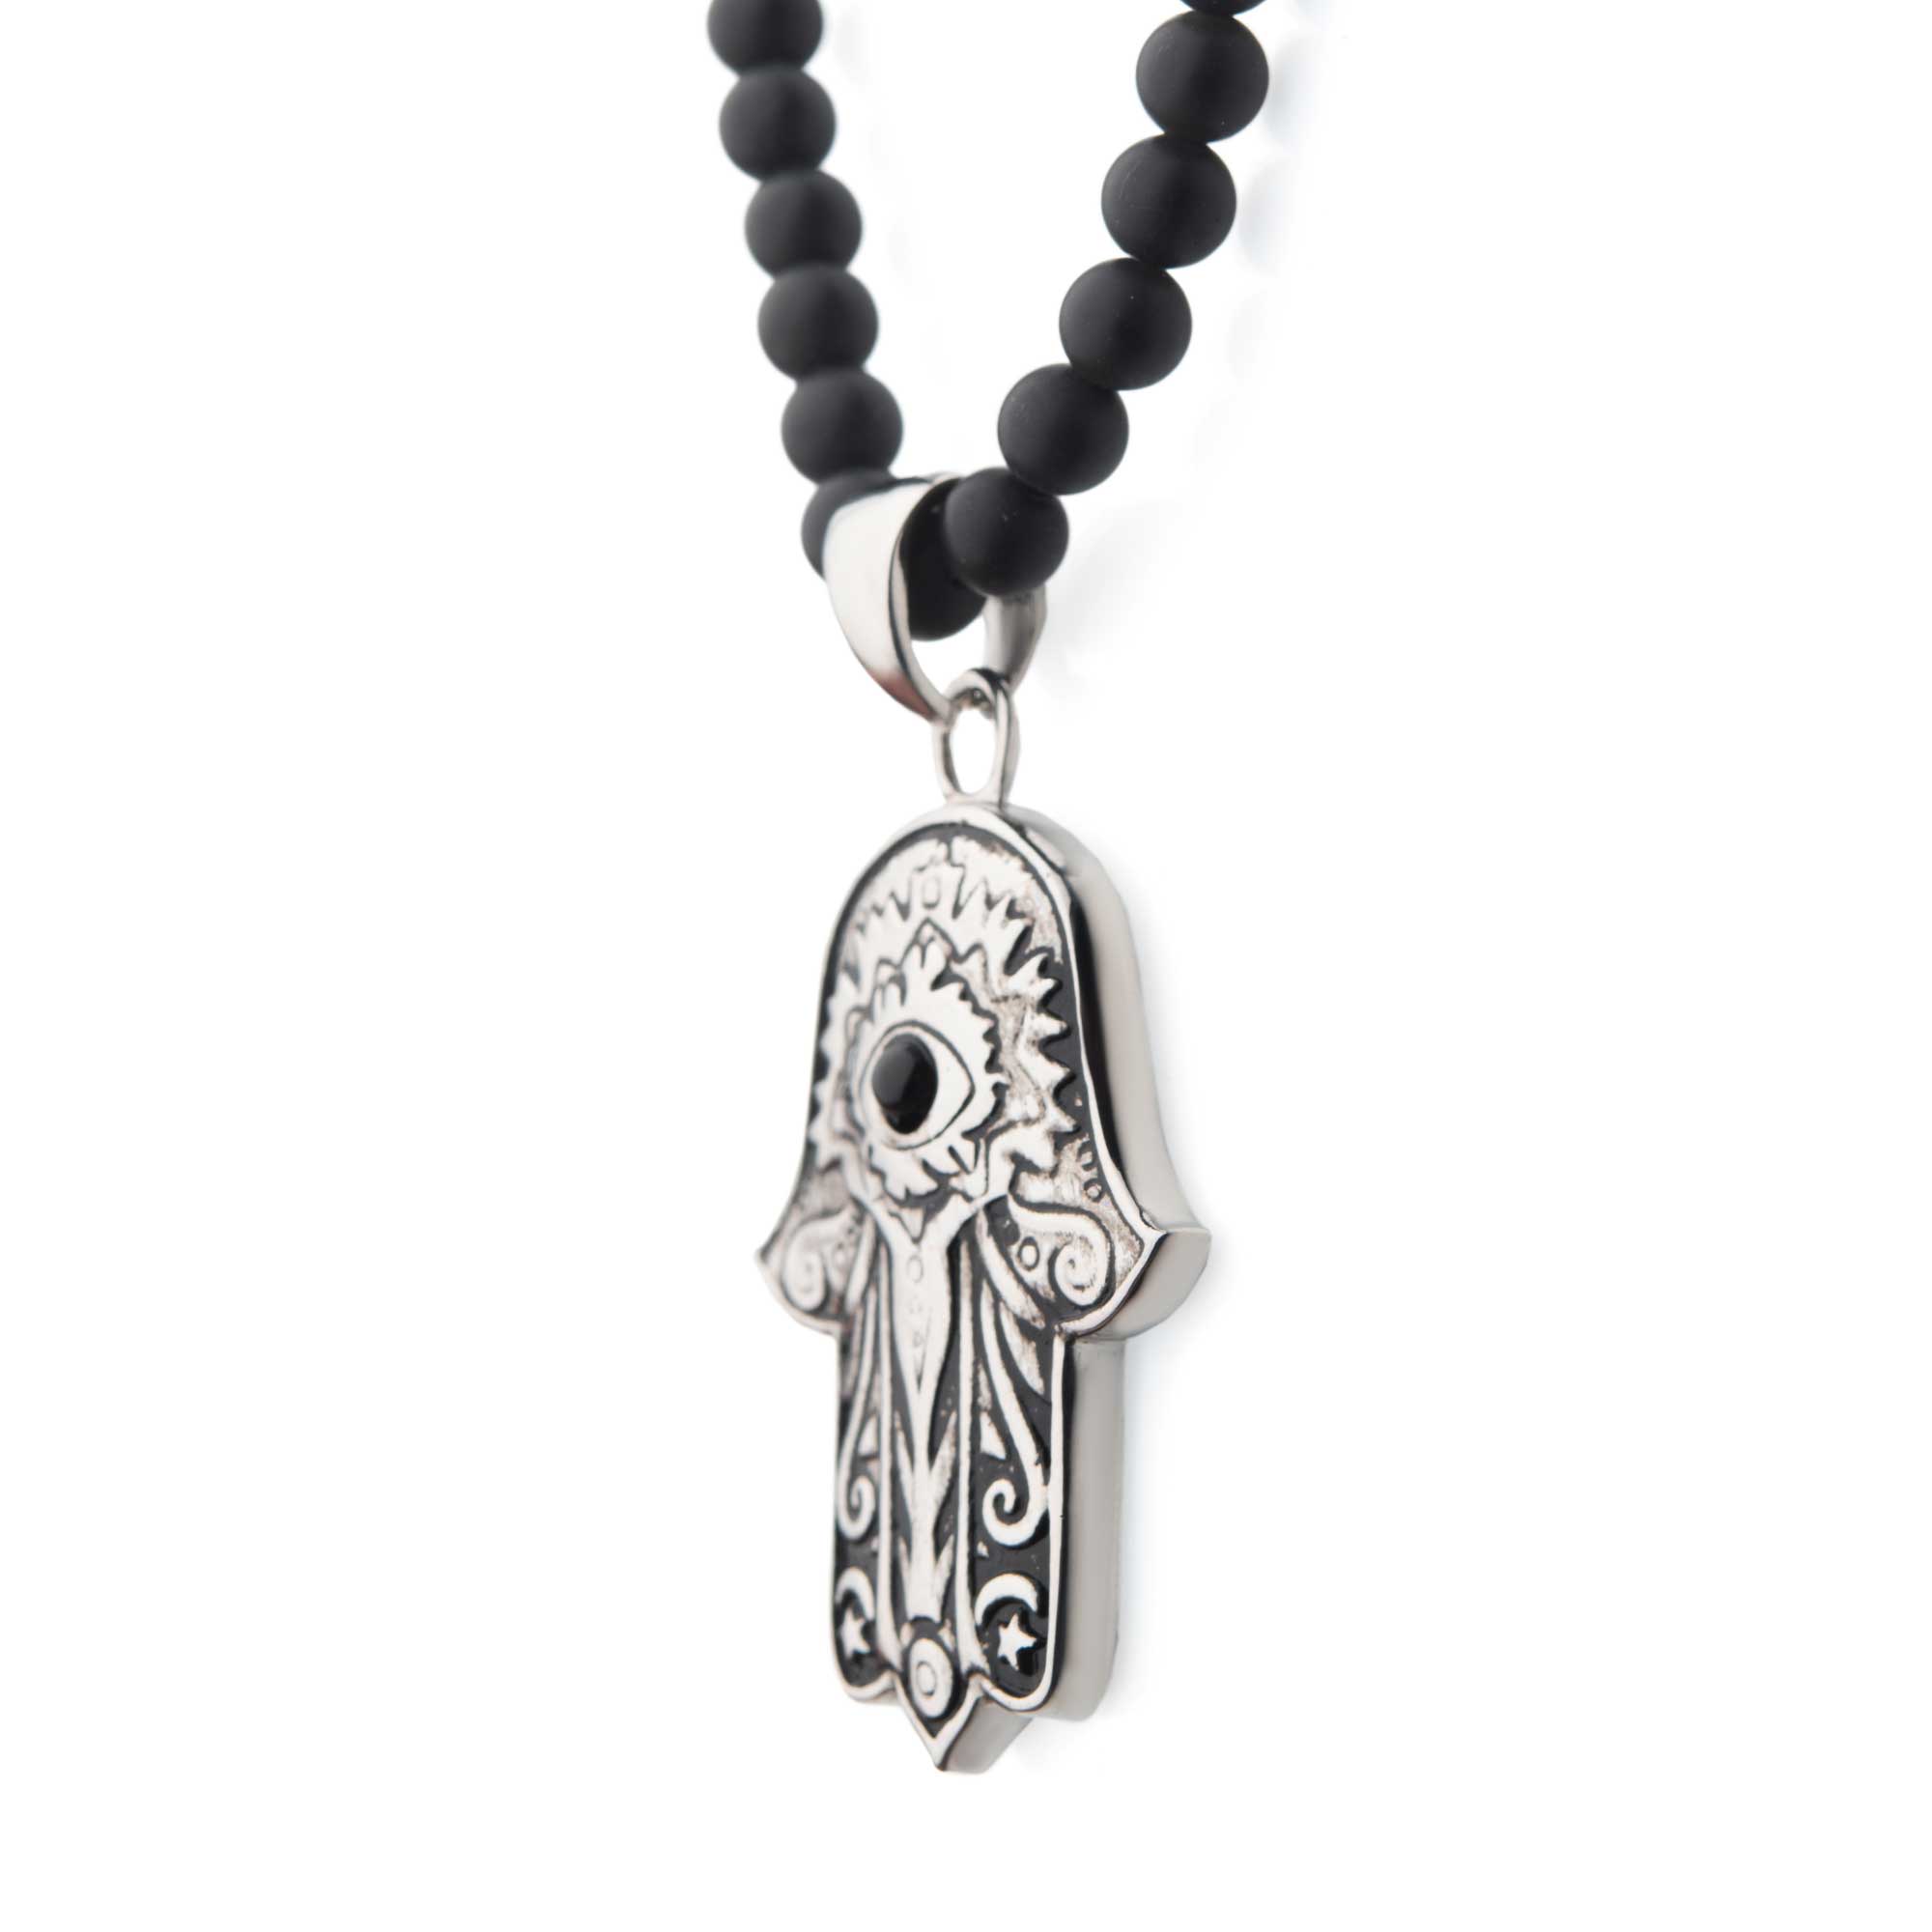 Stainless Steel with Centerpiece Black Agate Stone Hamsa Pendant, with Black Agate Stone Bead Necklace Image 3 Ken Walker Jewelers Gig Harbor, WA